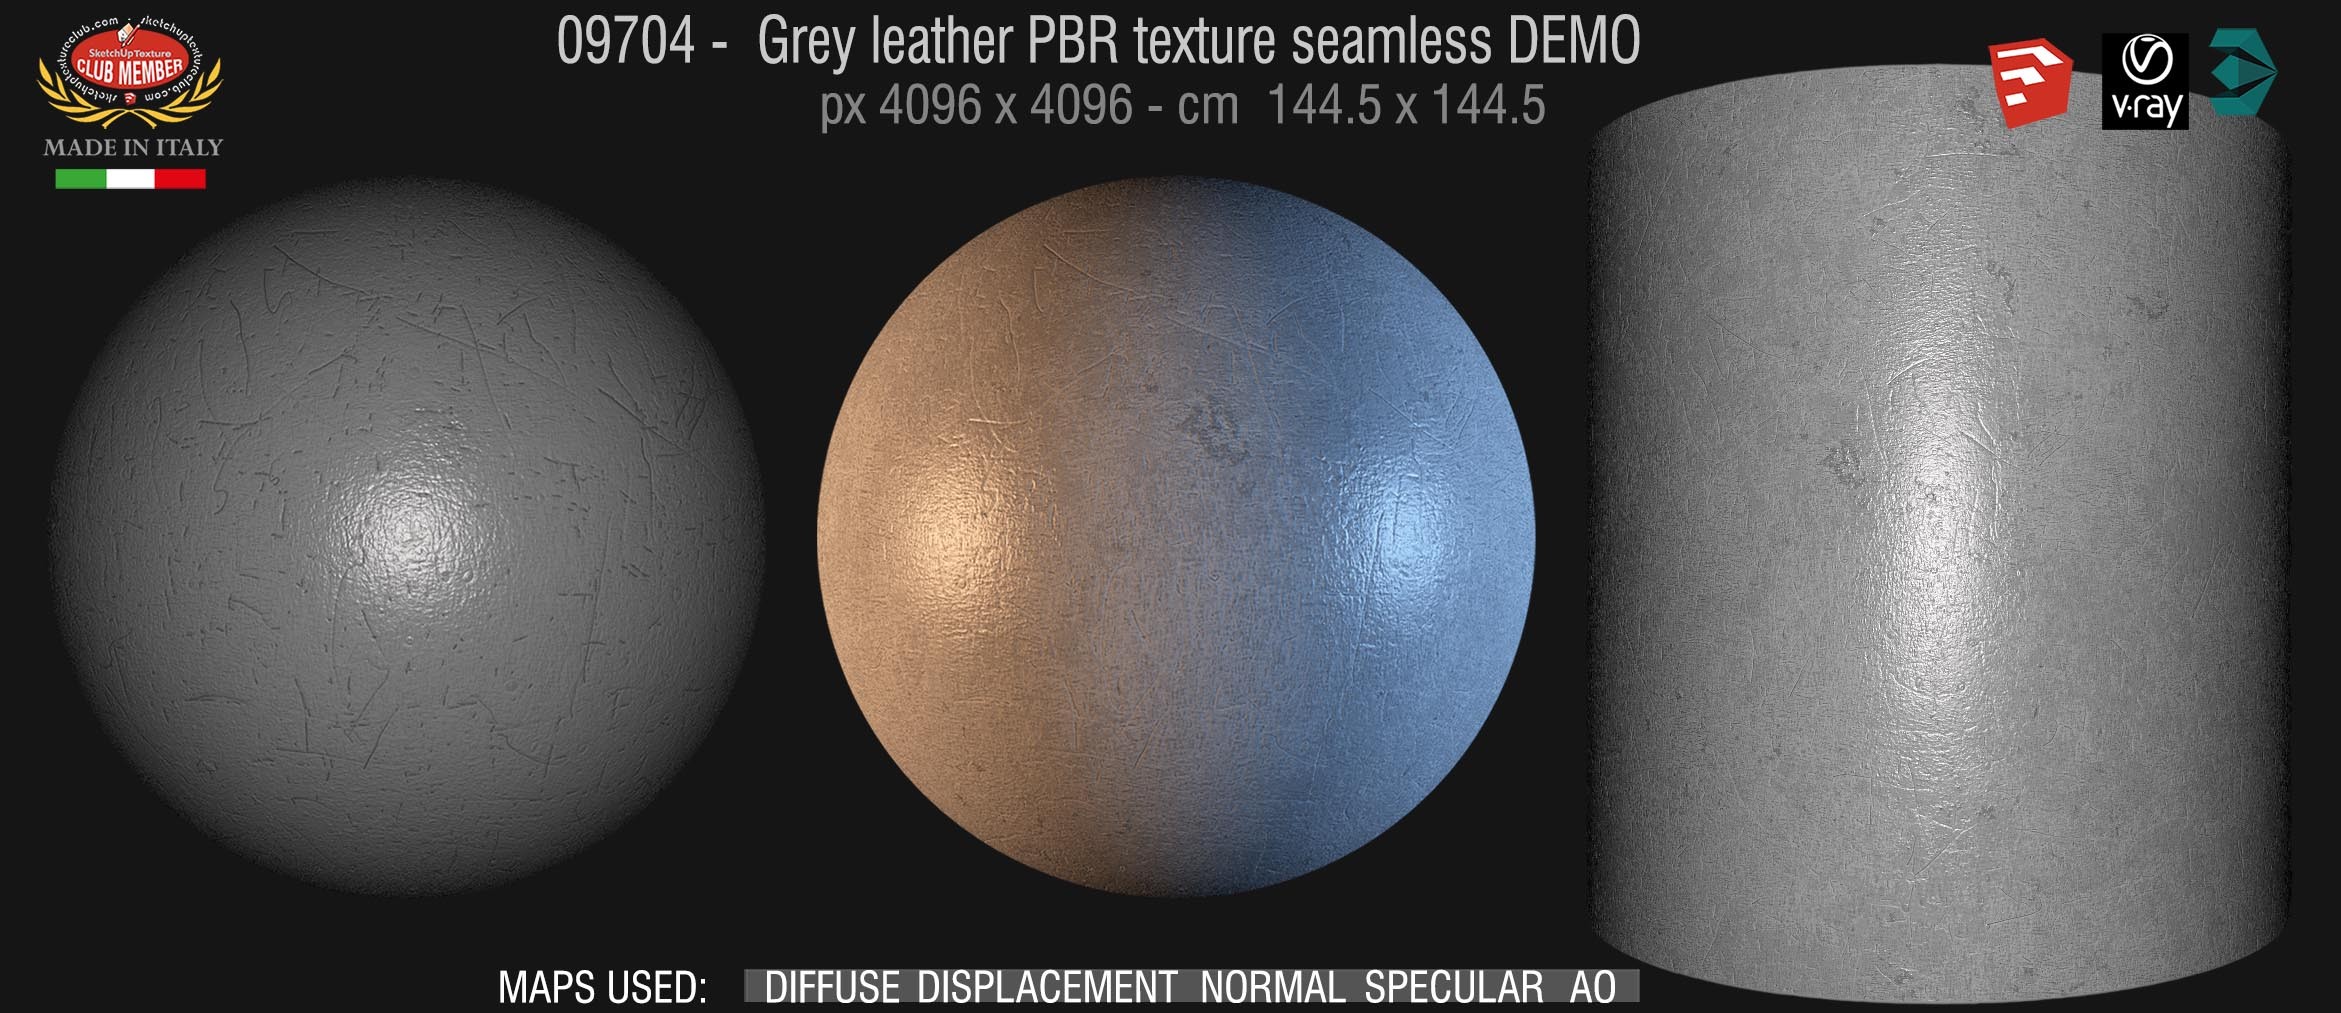 09704 Grey leather PBR texture seamless DEMO